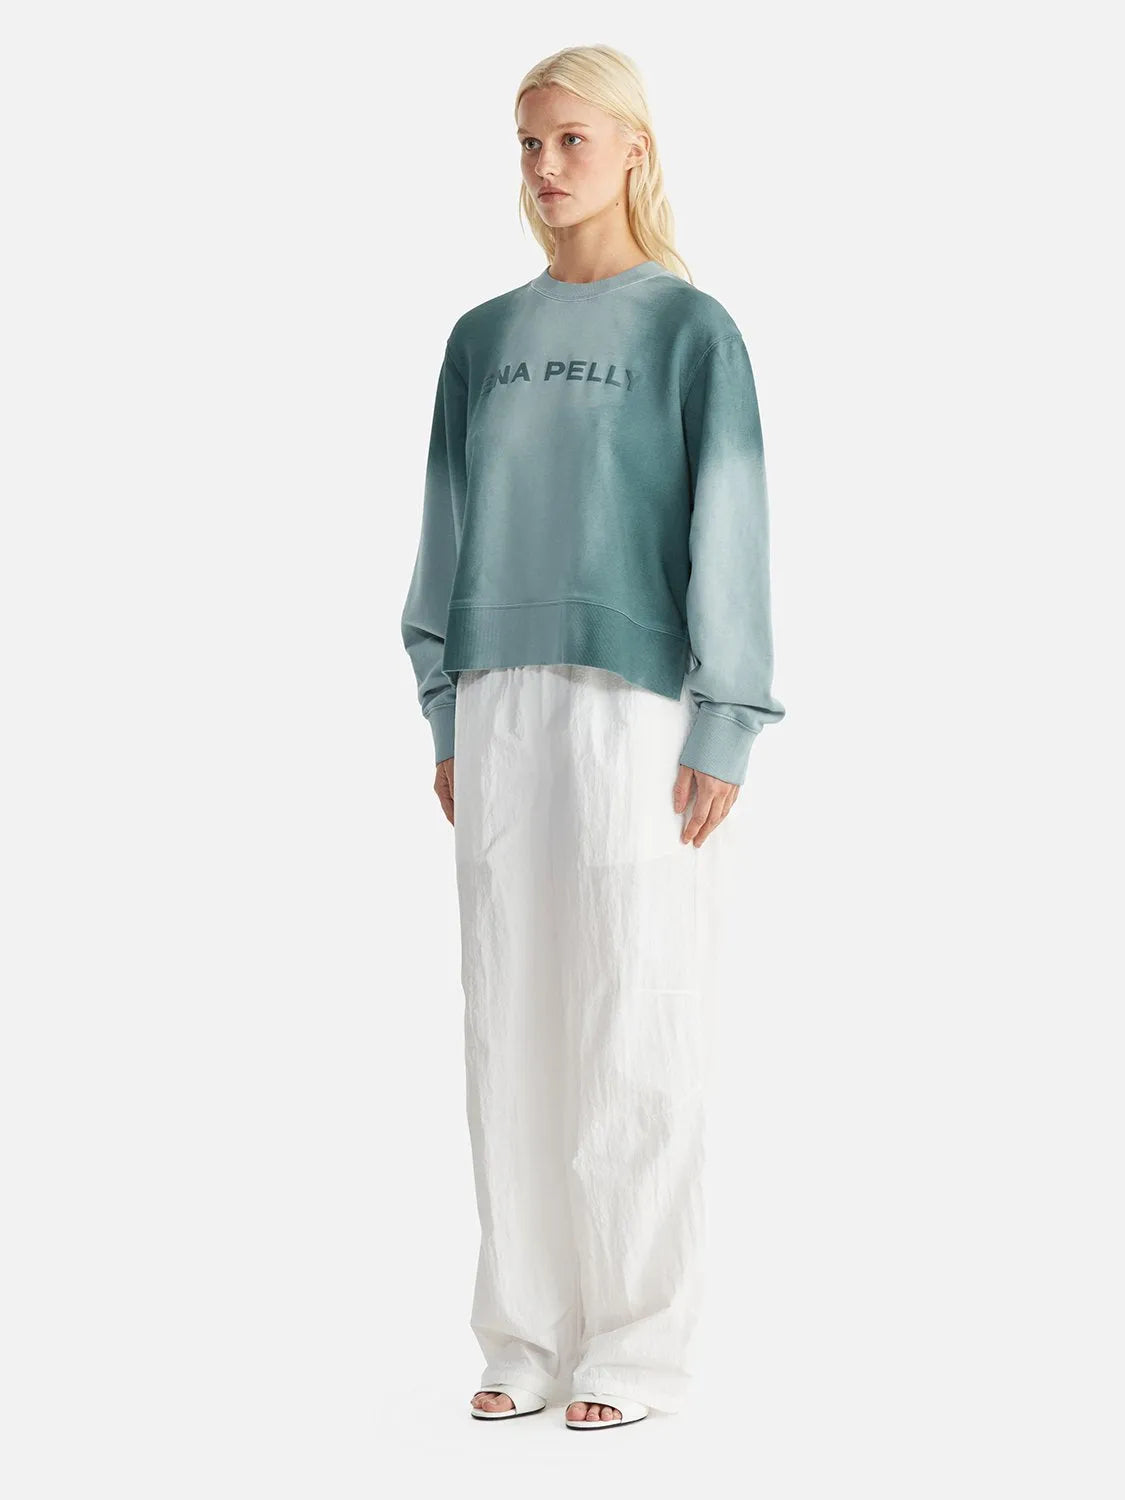 Ena Pelly | Remi Relaxed Sweater Ombre Mist/Teal